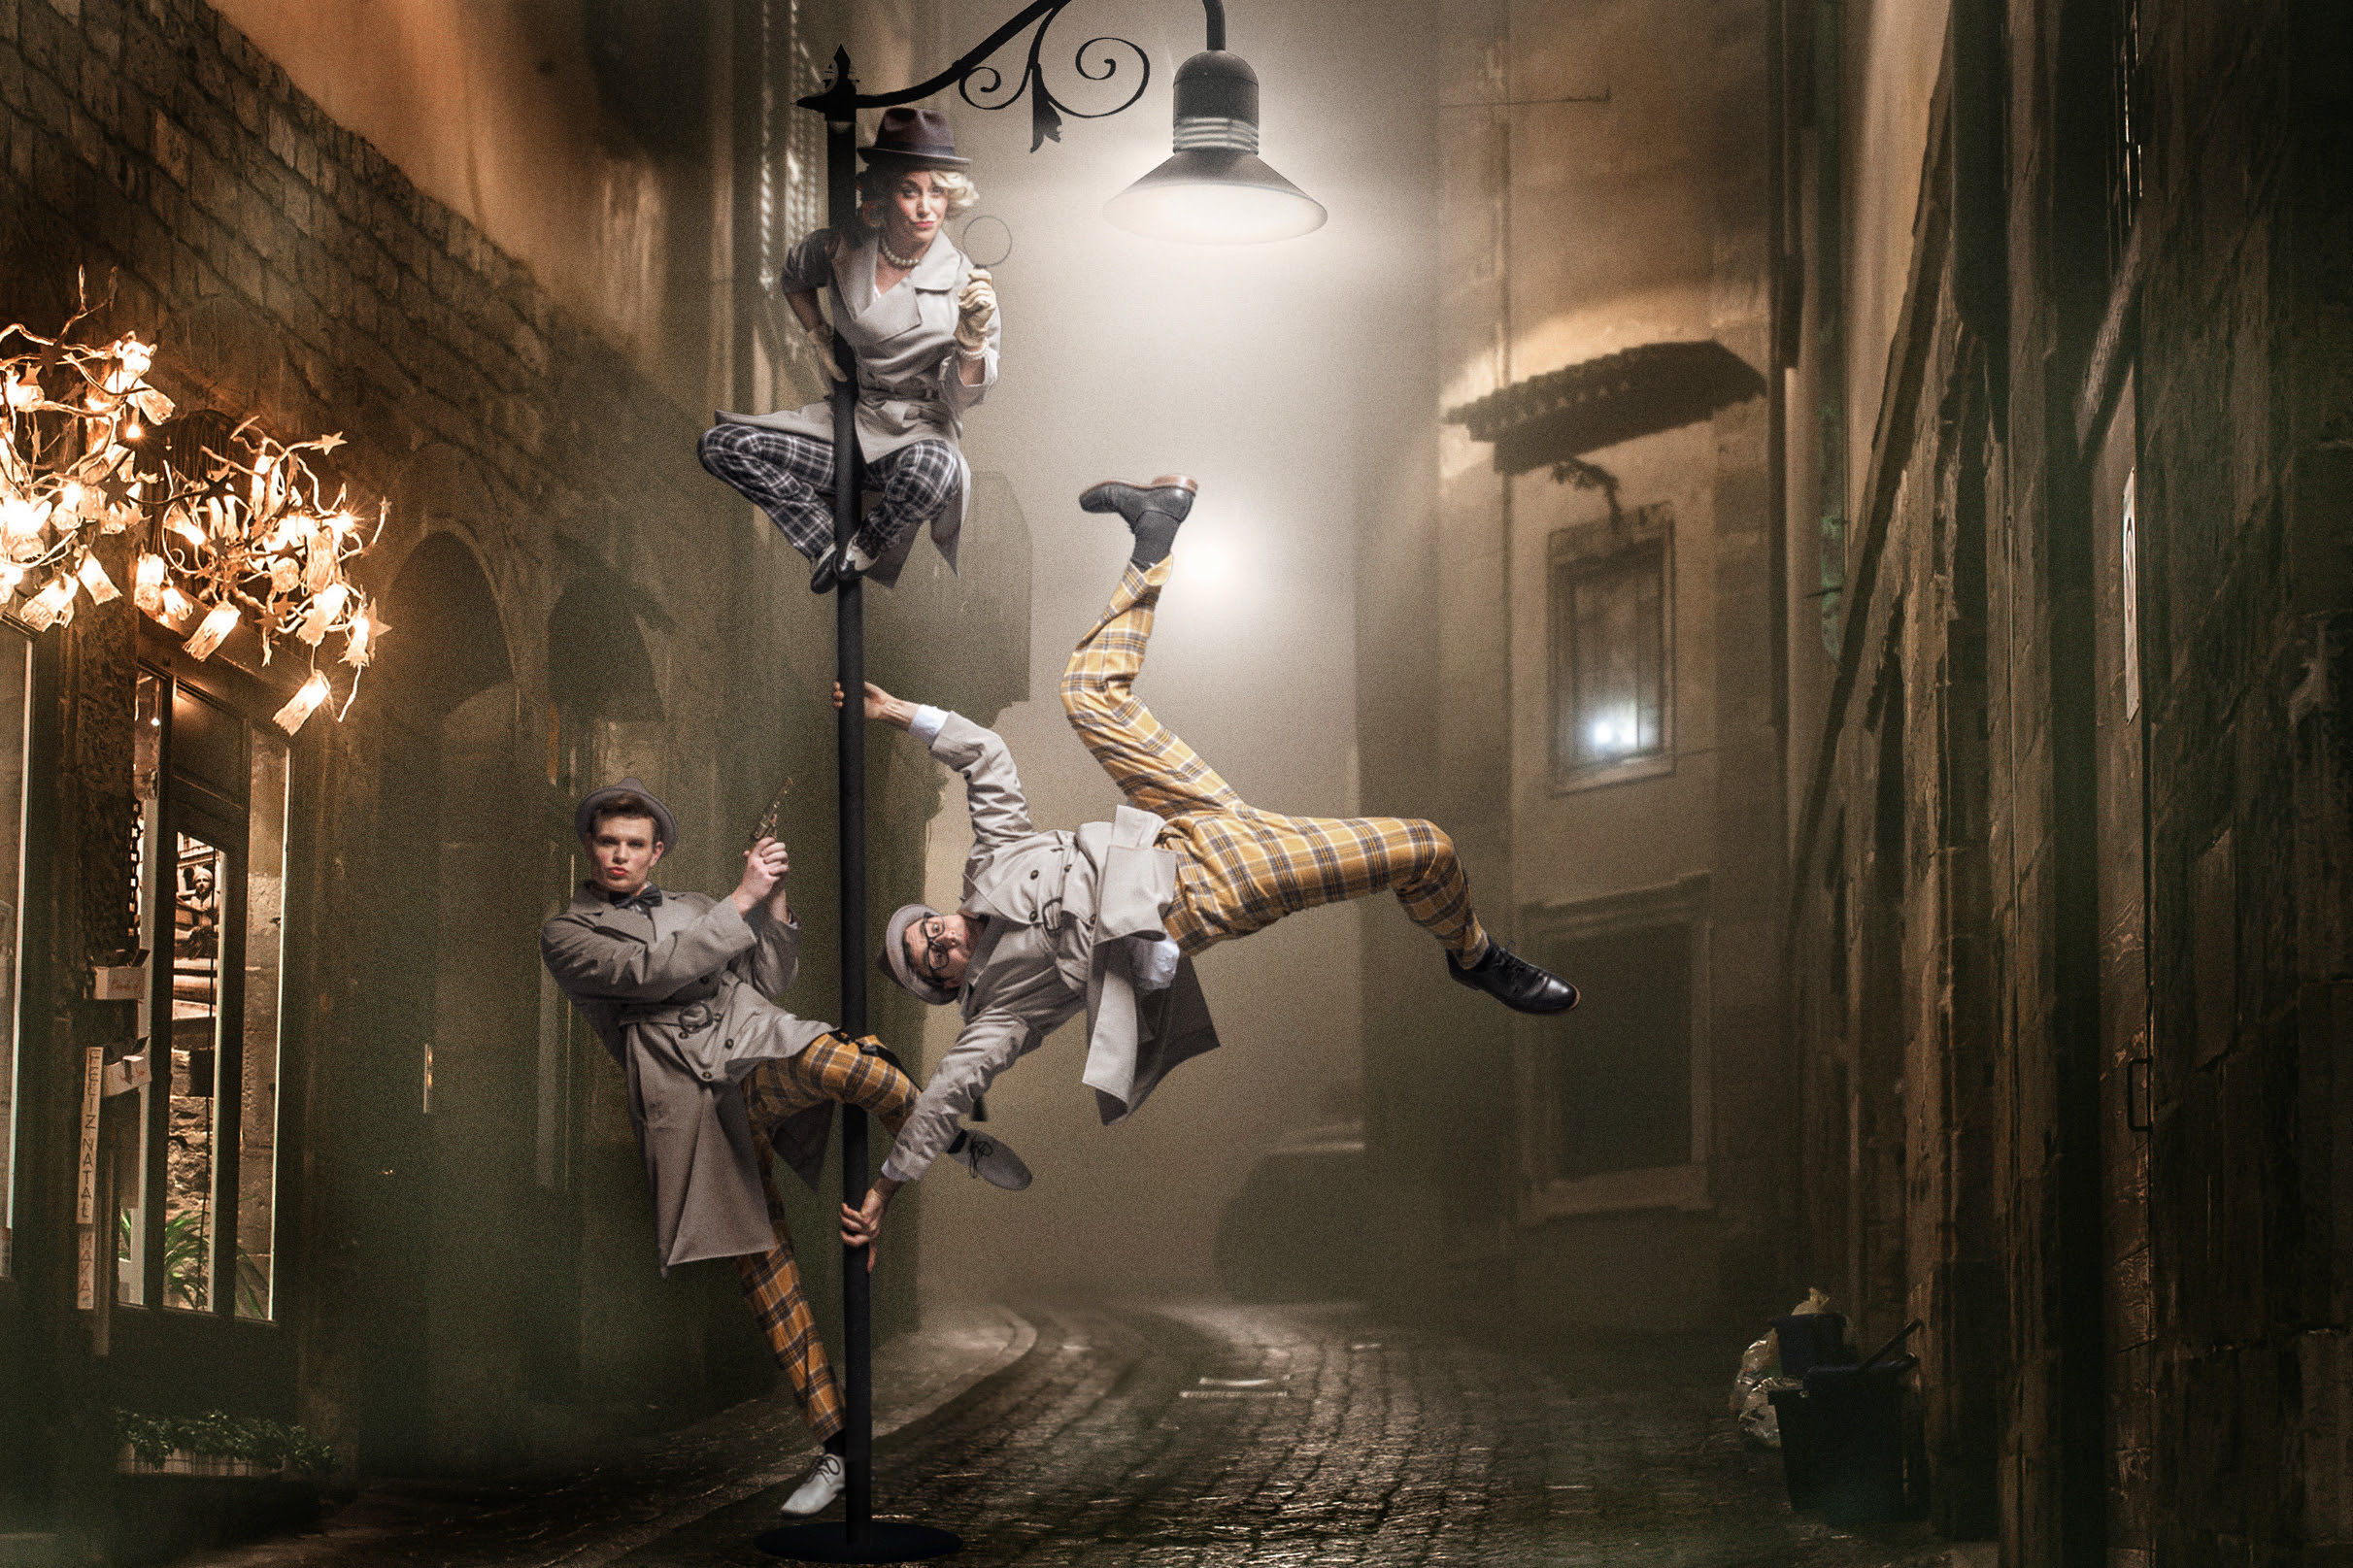 Dumtectives in Cirque Noir acrobats in detective outfits post on a street light